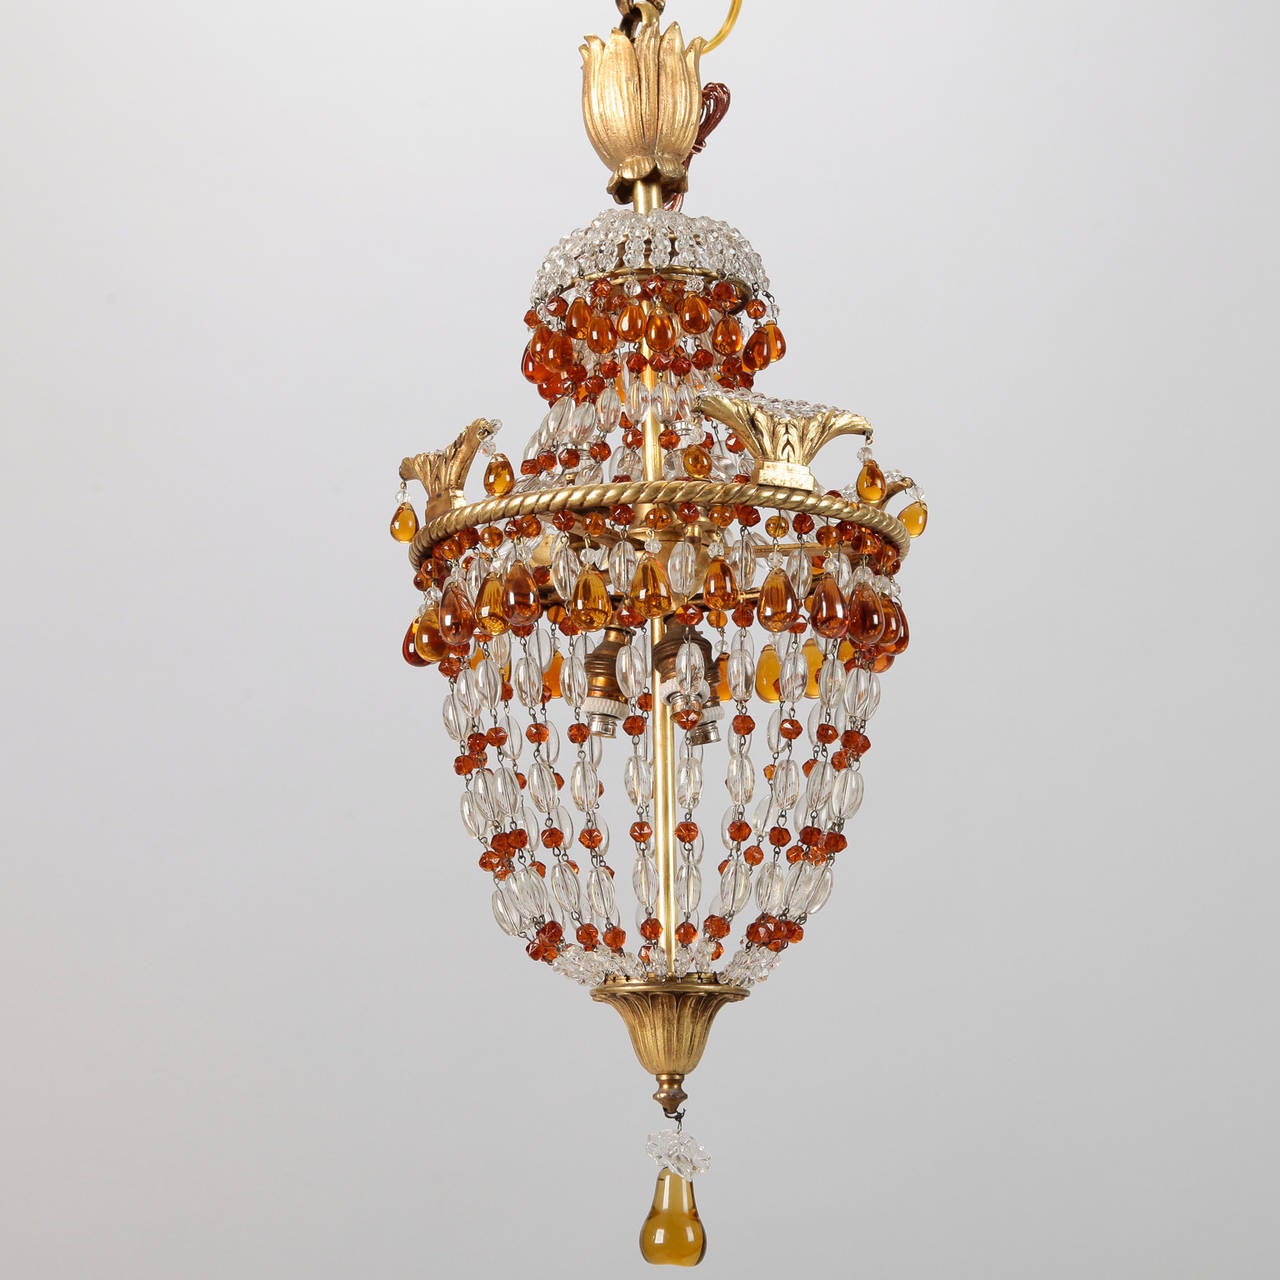 Circa 1890s small French chandelier with twisted form bronze frame supporting clear and amber crystal beads in basket shape. Internal light sockets, tulip form top ornament and pear shaped glass center drop. New wiring for US electrical